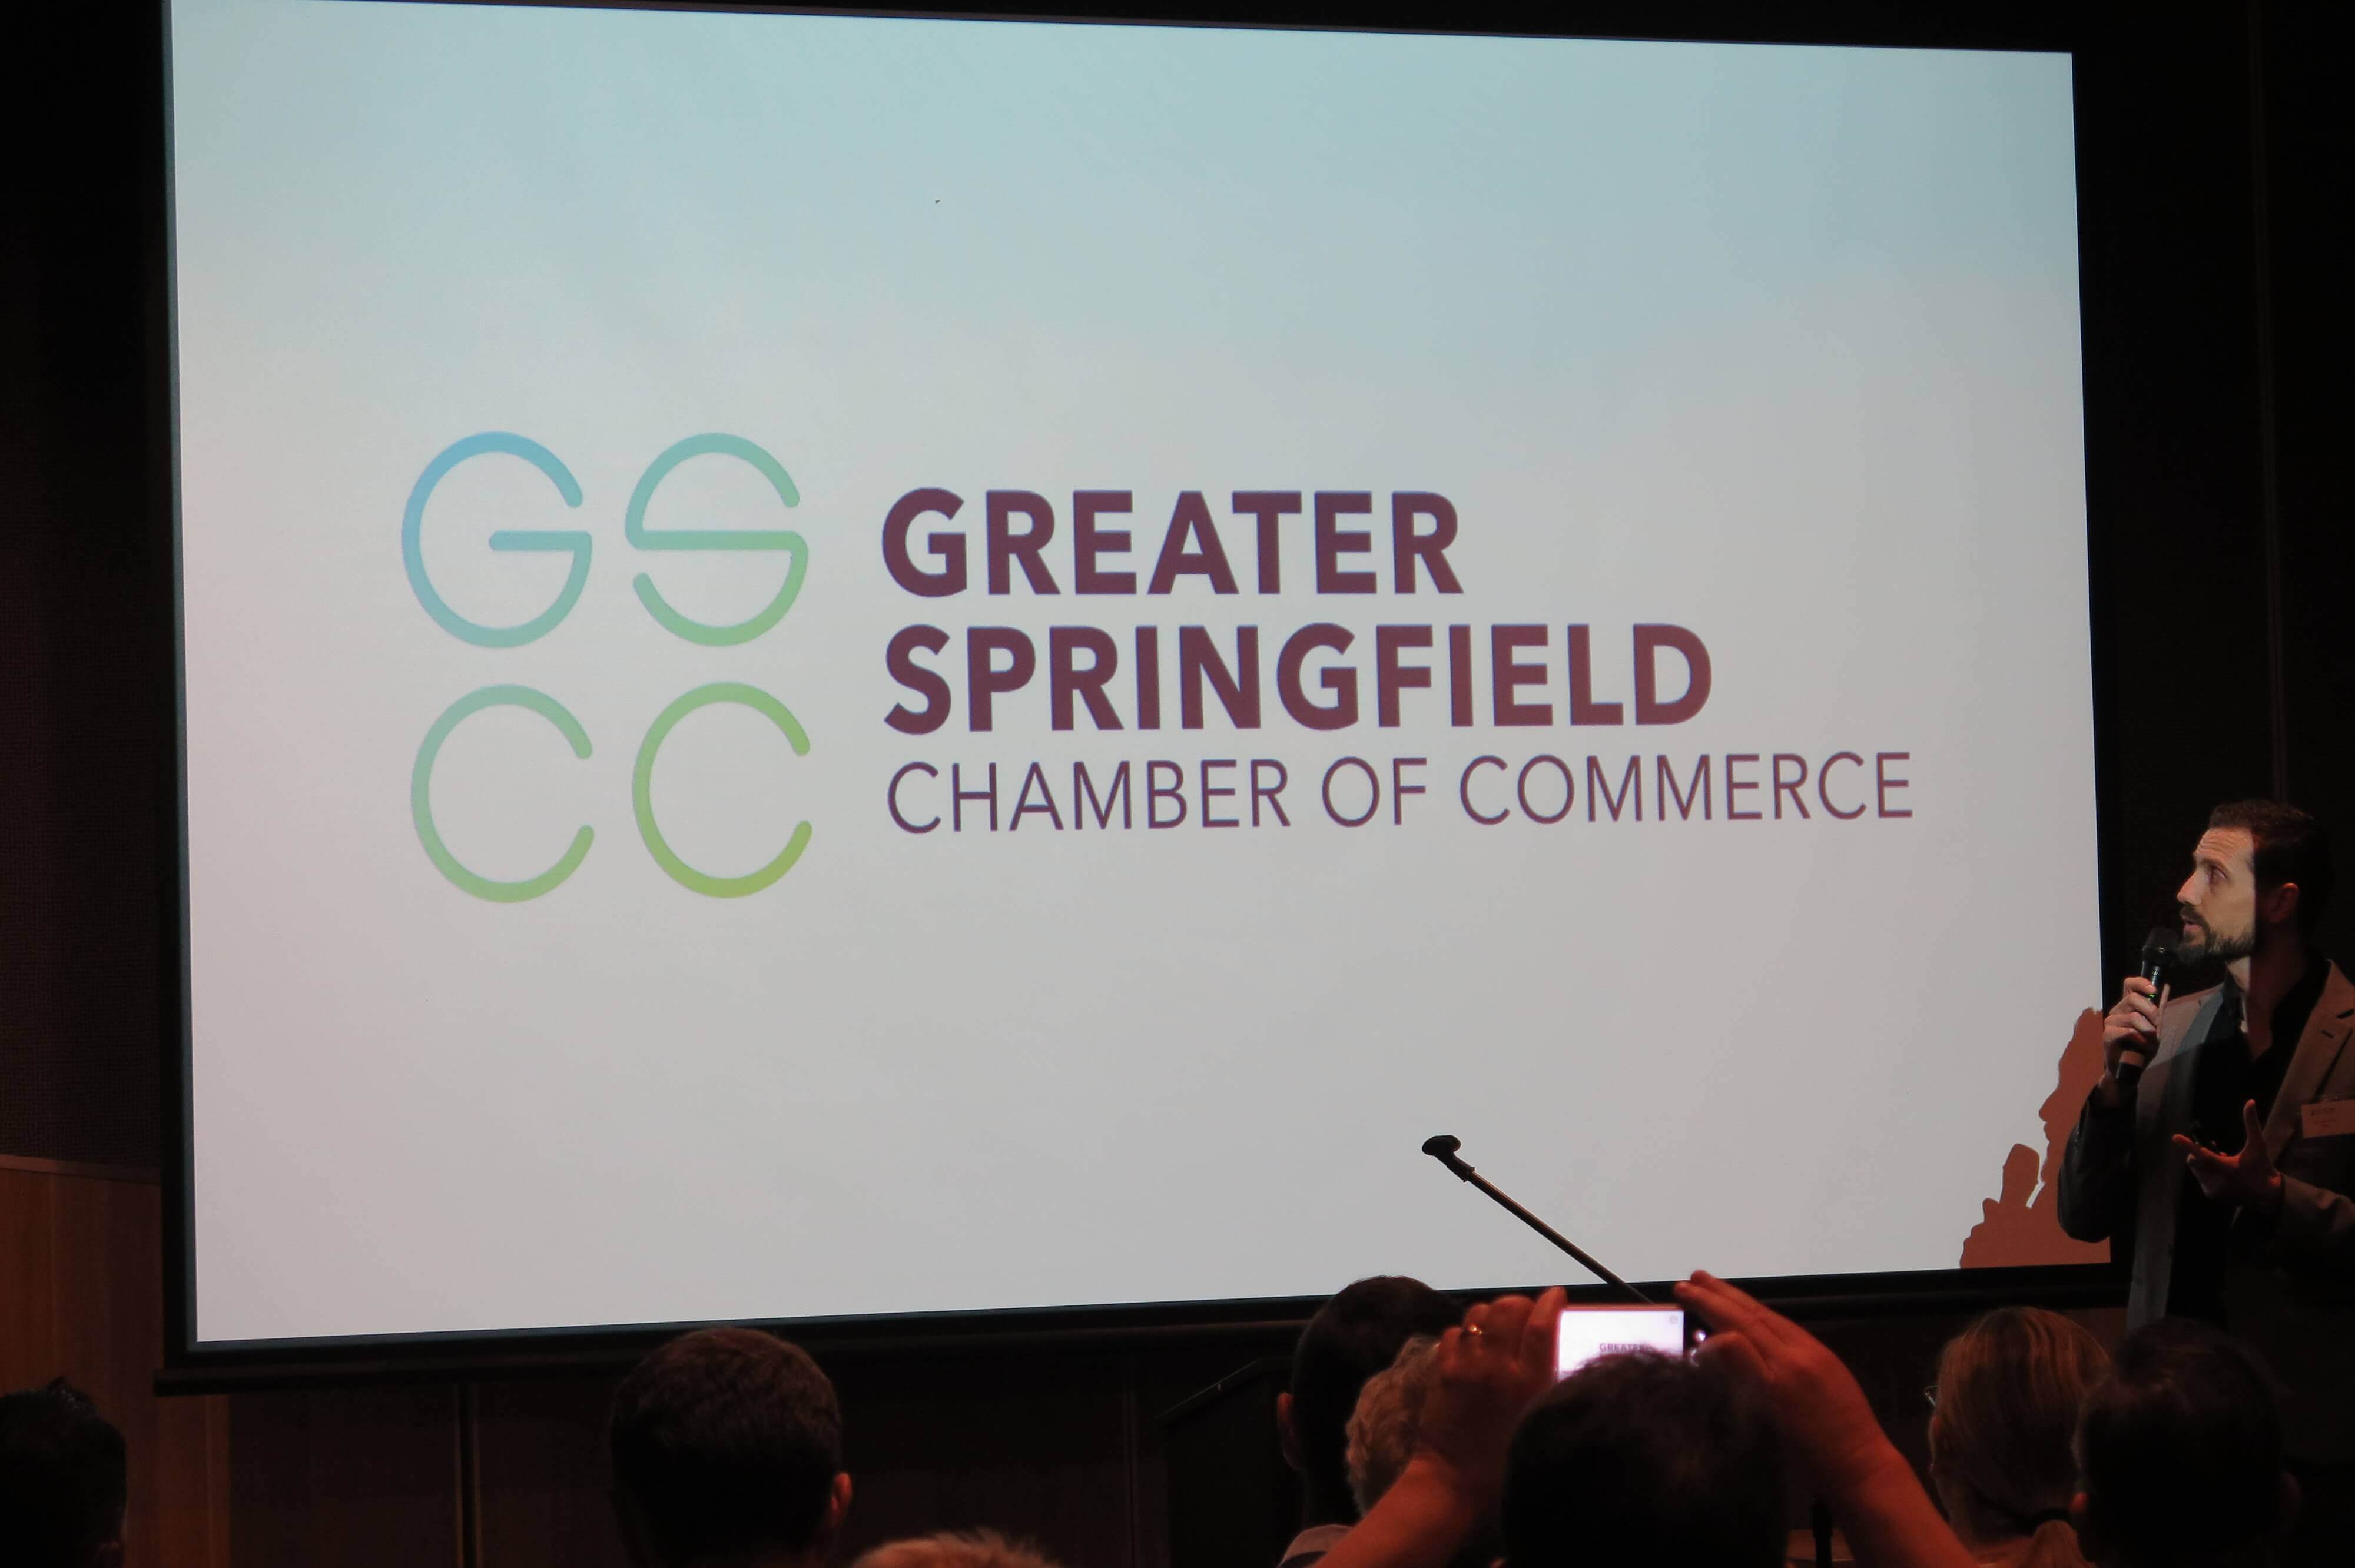 Greater Springfield Chamber of Commerce Undergoes a Full Rebrand